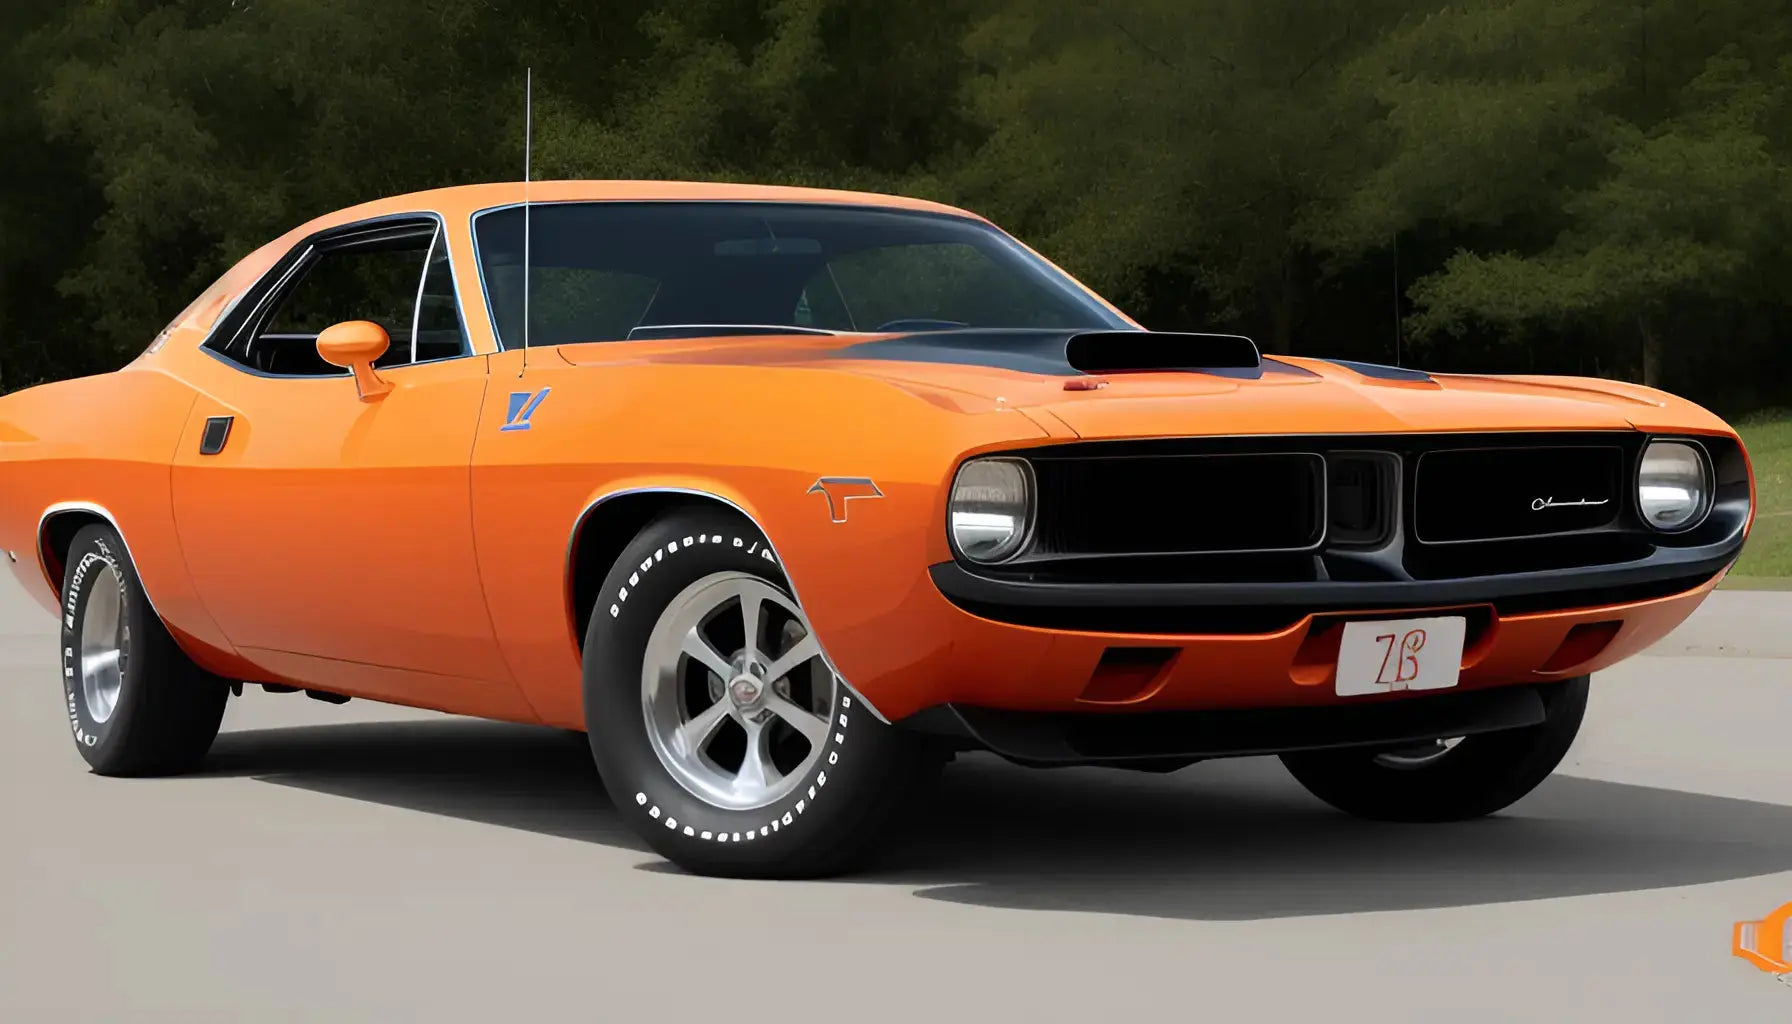 Which-Was-Faster-A-1970-Dodge-SuperBee-or-a-1970-Plymouth-Hemi-Cuda Rapidvehicles.com